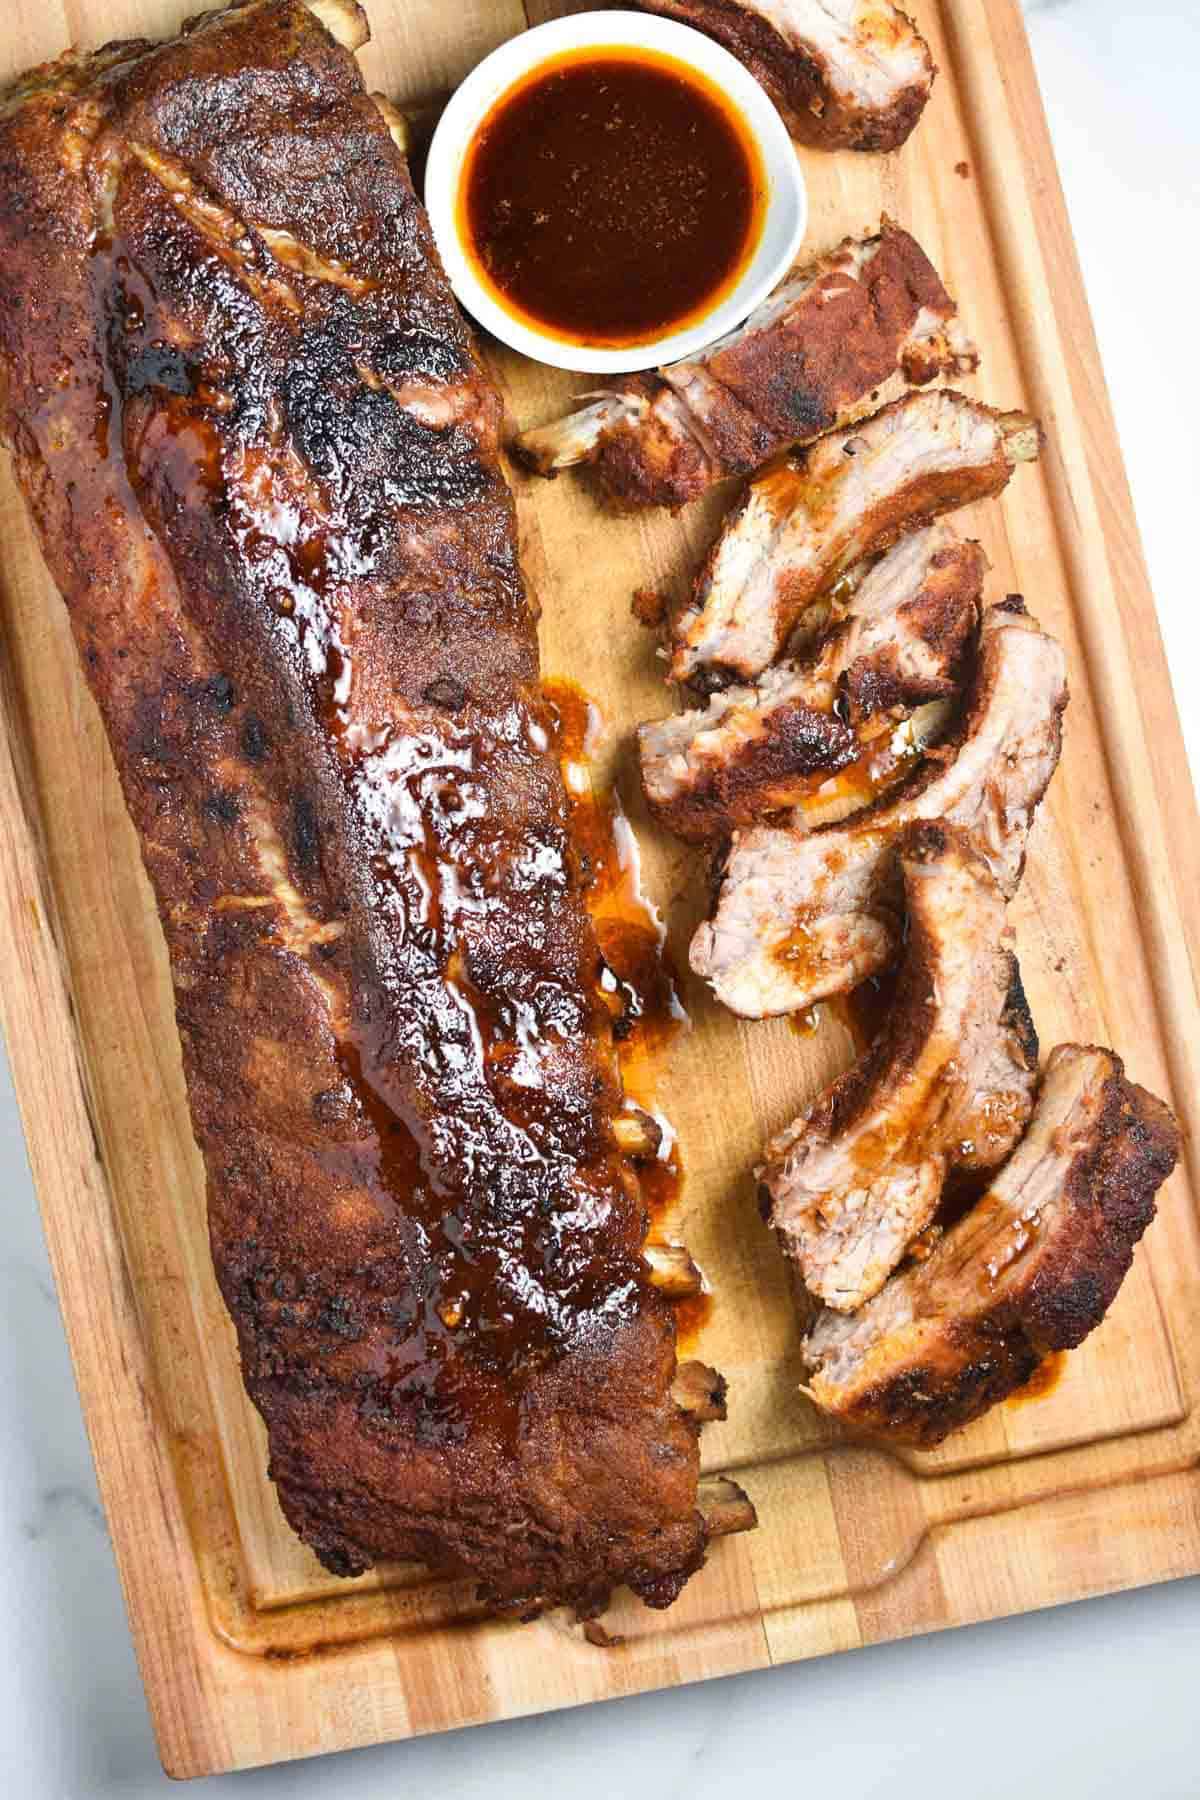 juicy bbq oven ribs rack on a wooden board with a barbecue sauce on the side.